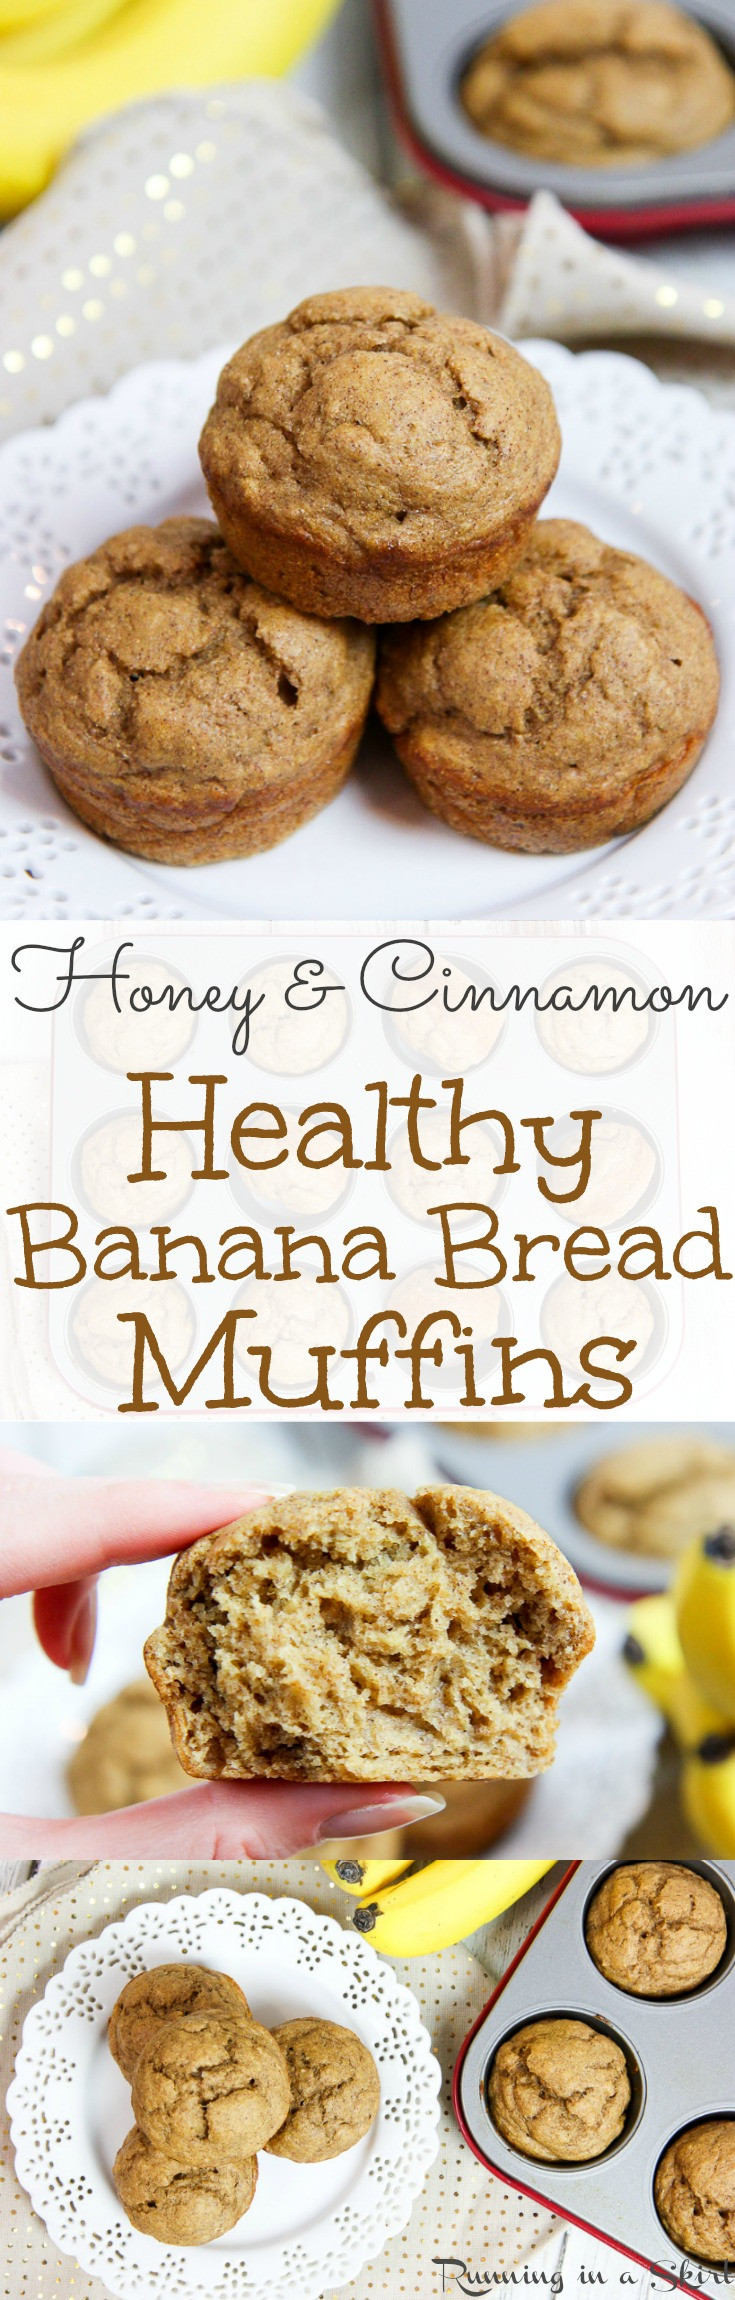 Clean Eating Muffins
 Clean Eating Banana Bread Muffins Recipe